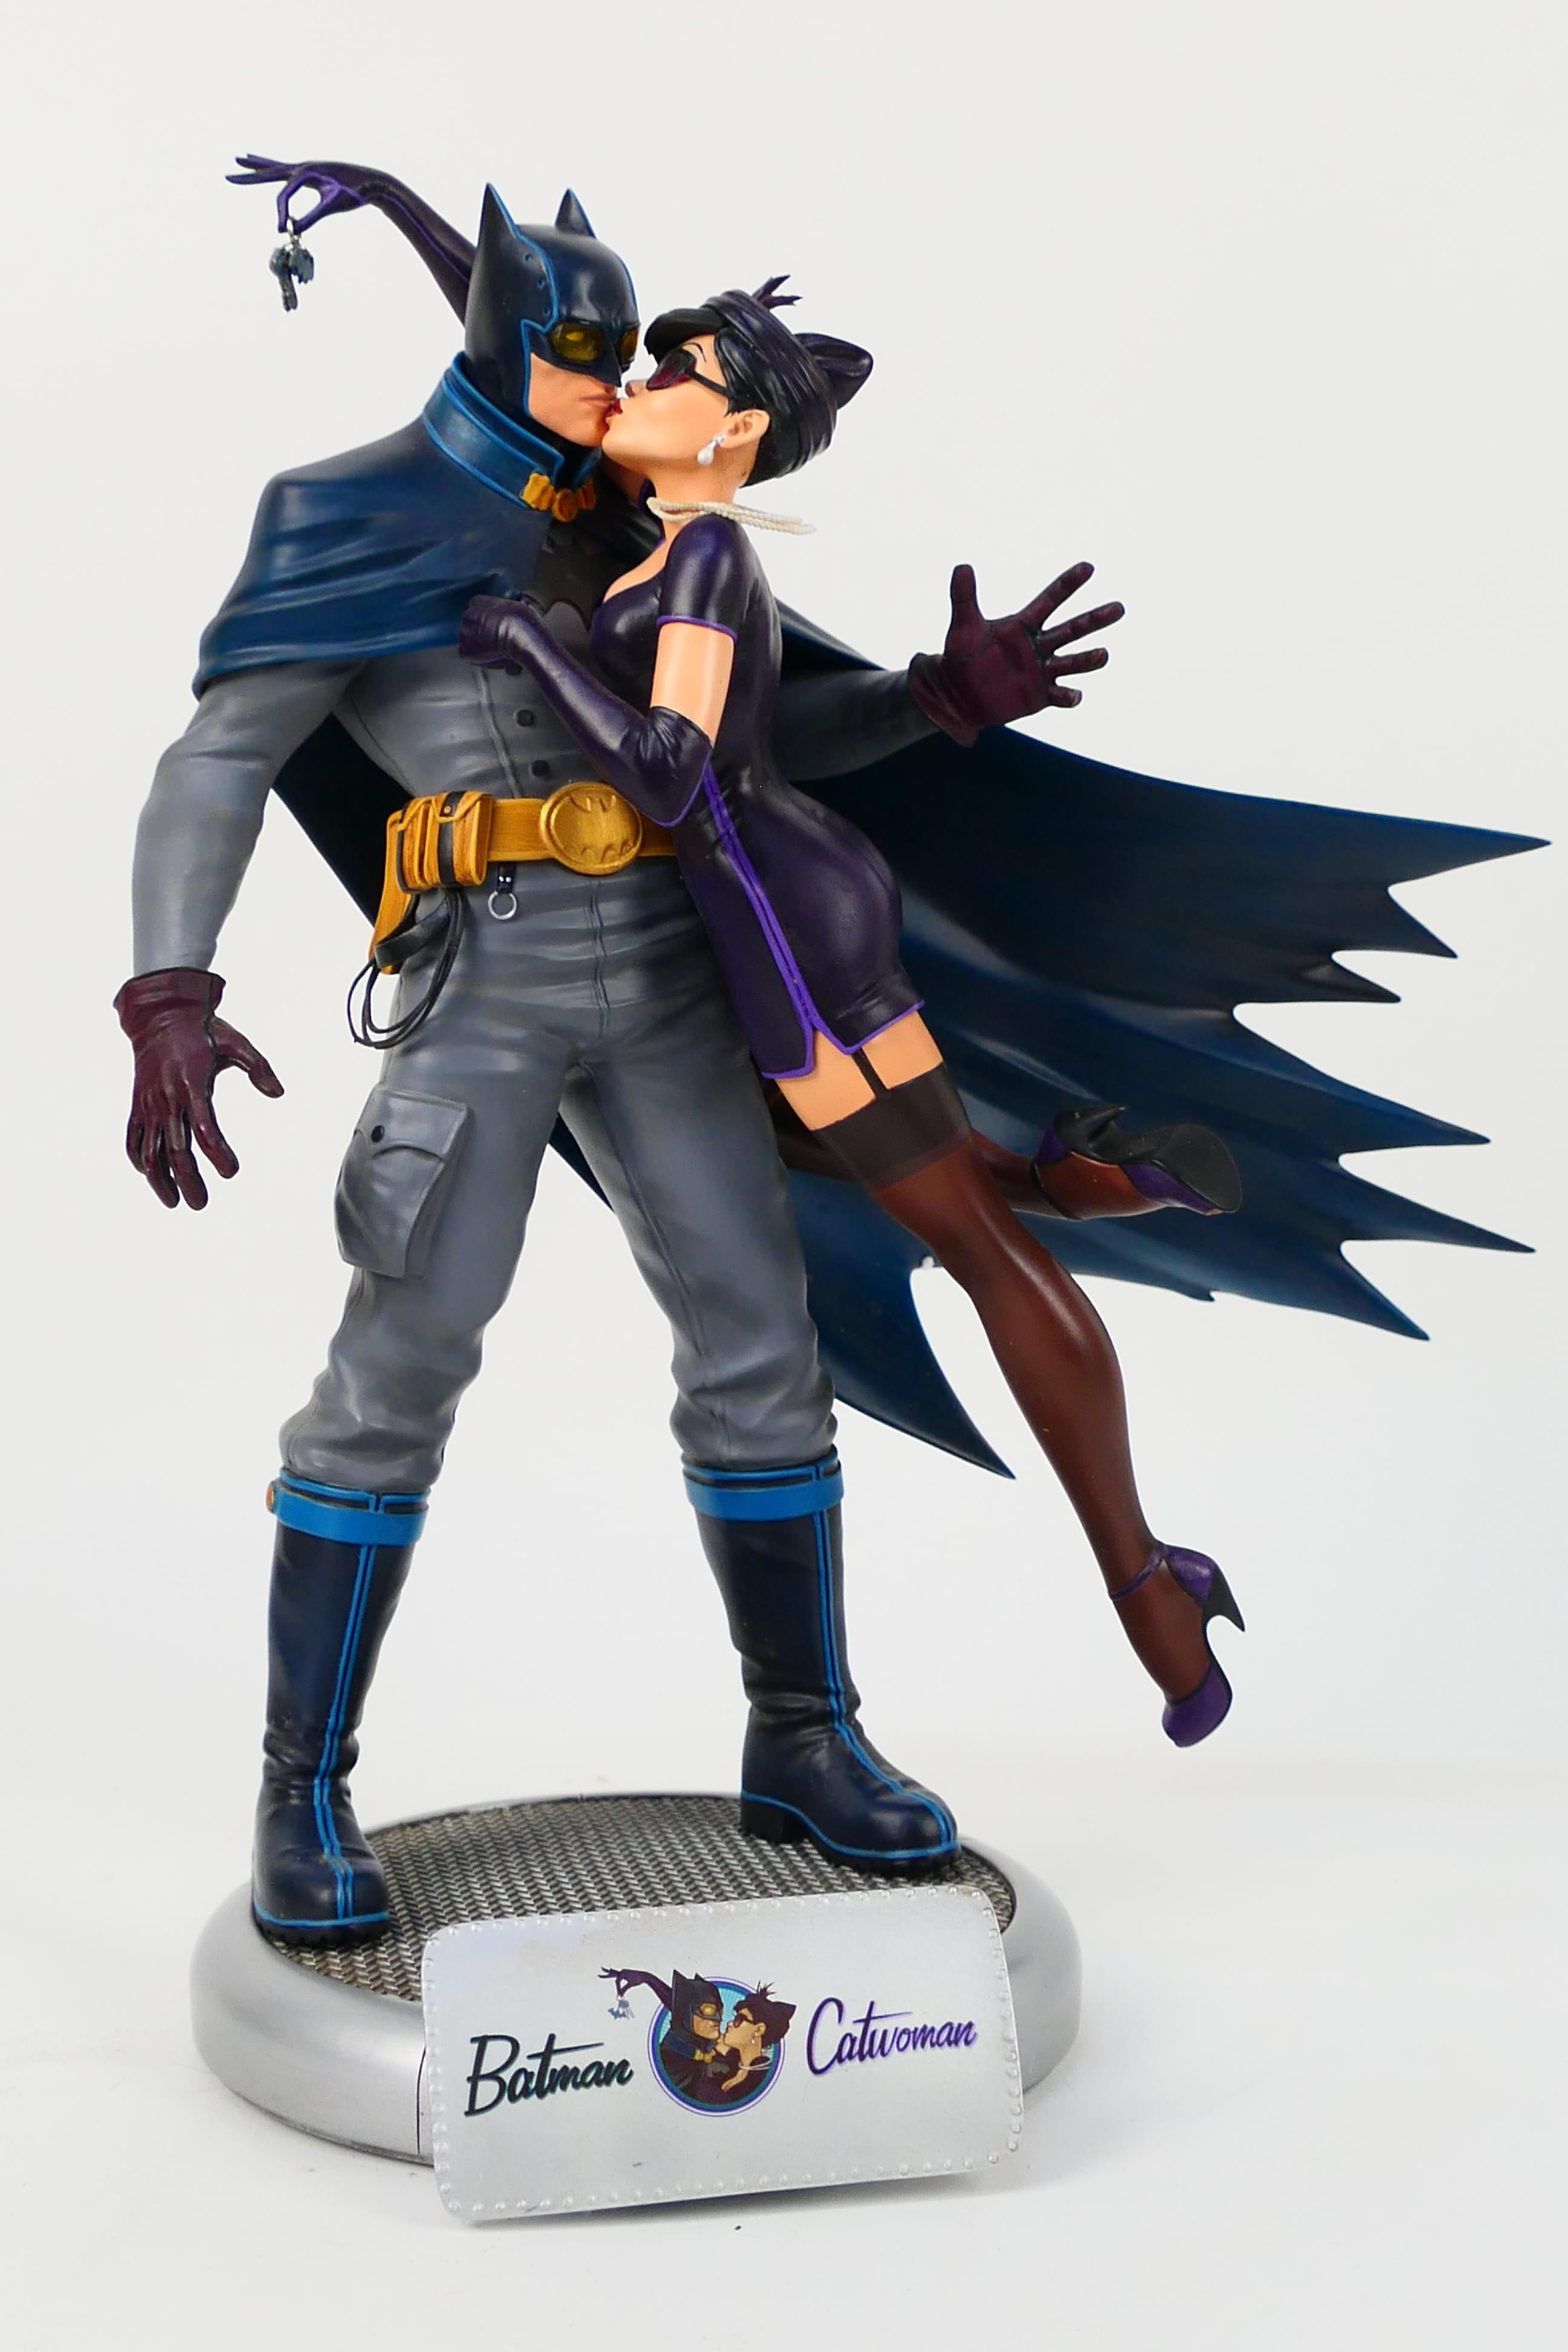 DC Collectibles - Batman - A limited edition DC Bombshells series Batman & Catwoman deluxe statue - Image 2 of 5